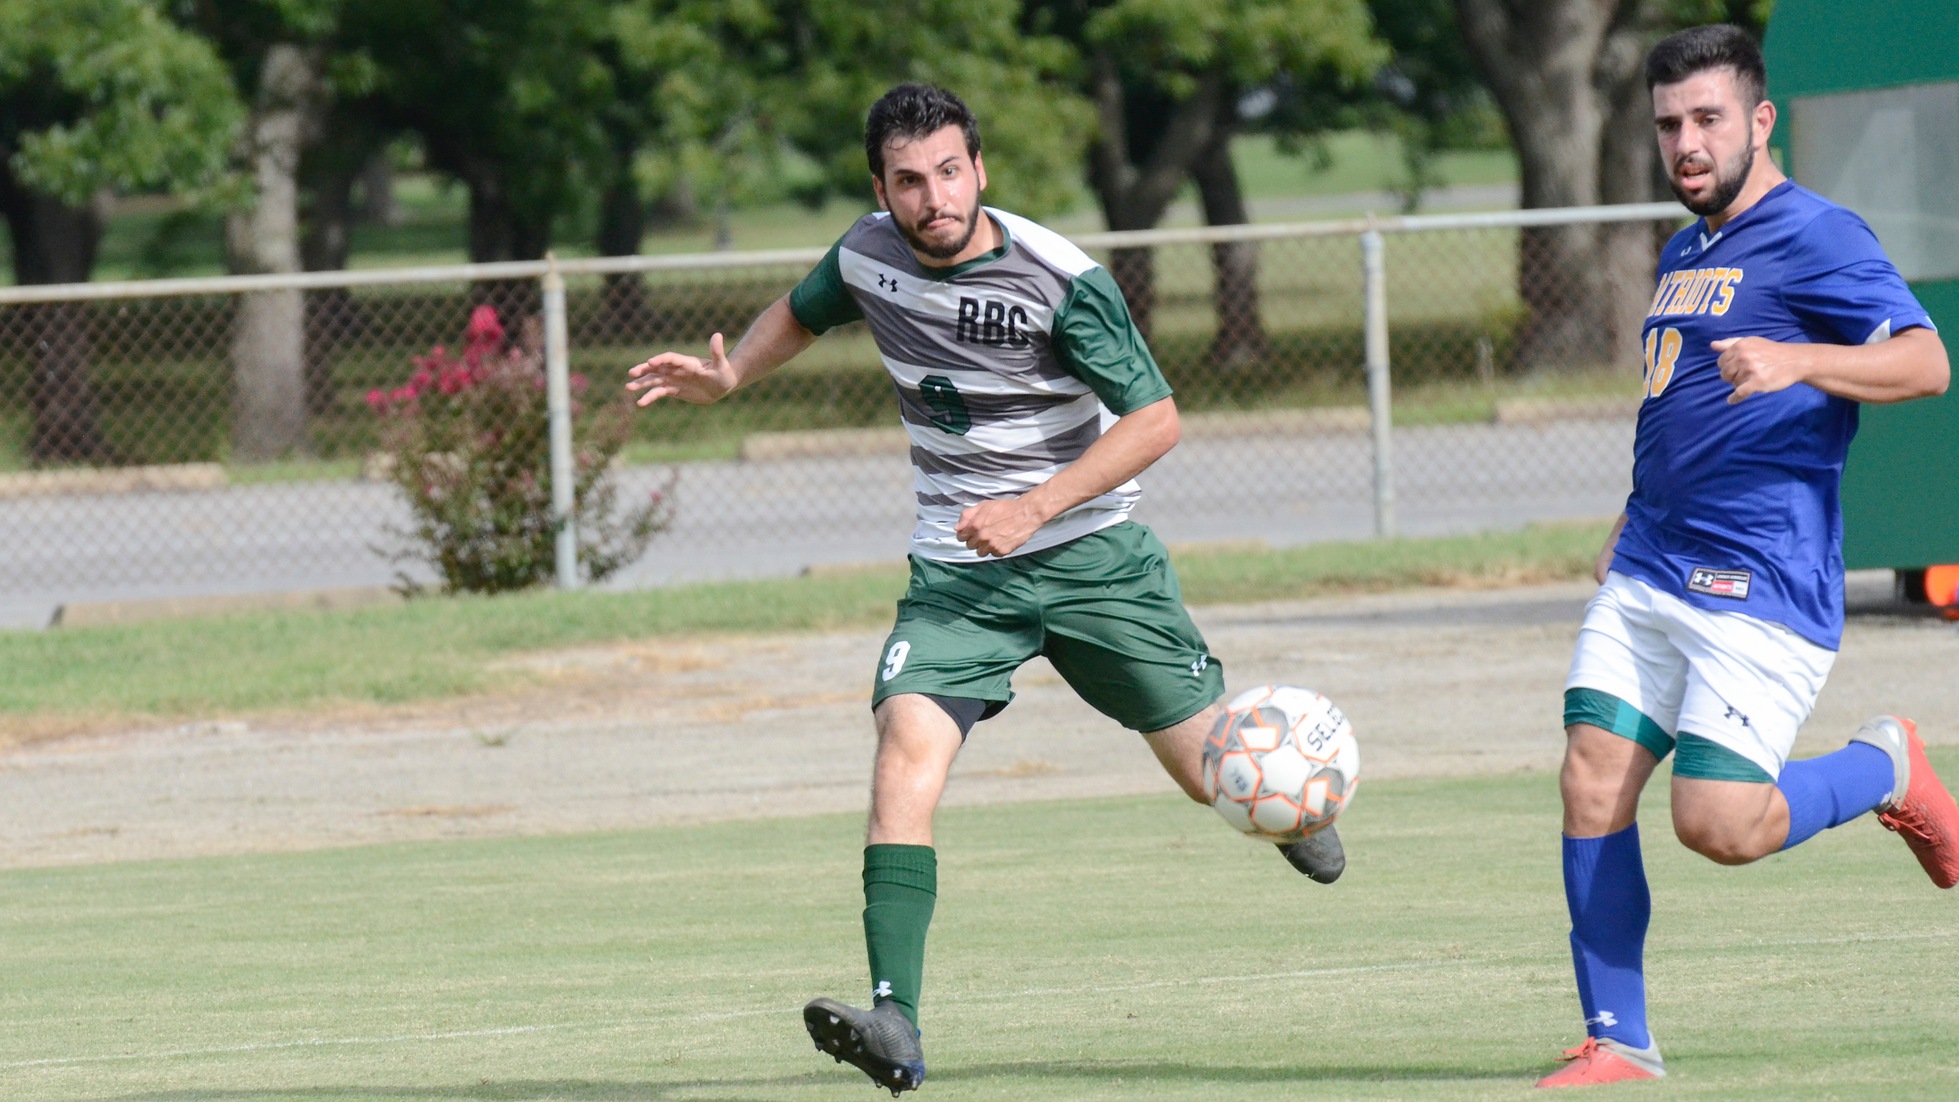 3-0 Shutout at USC Salkehatchie, Men's Soccer with Seven Straight Wins